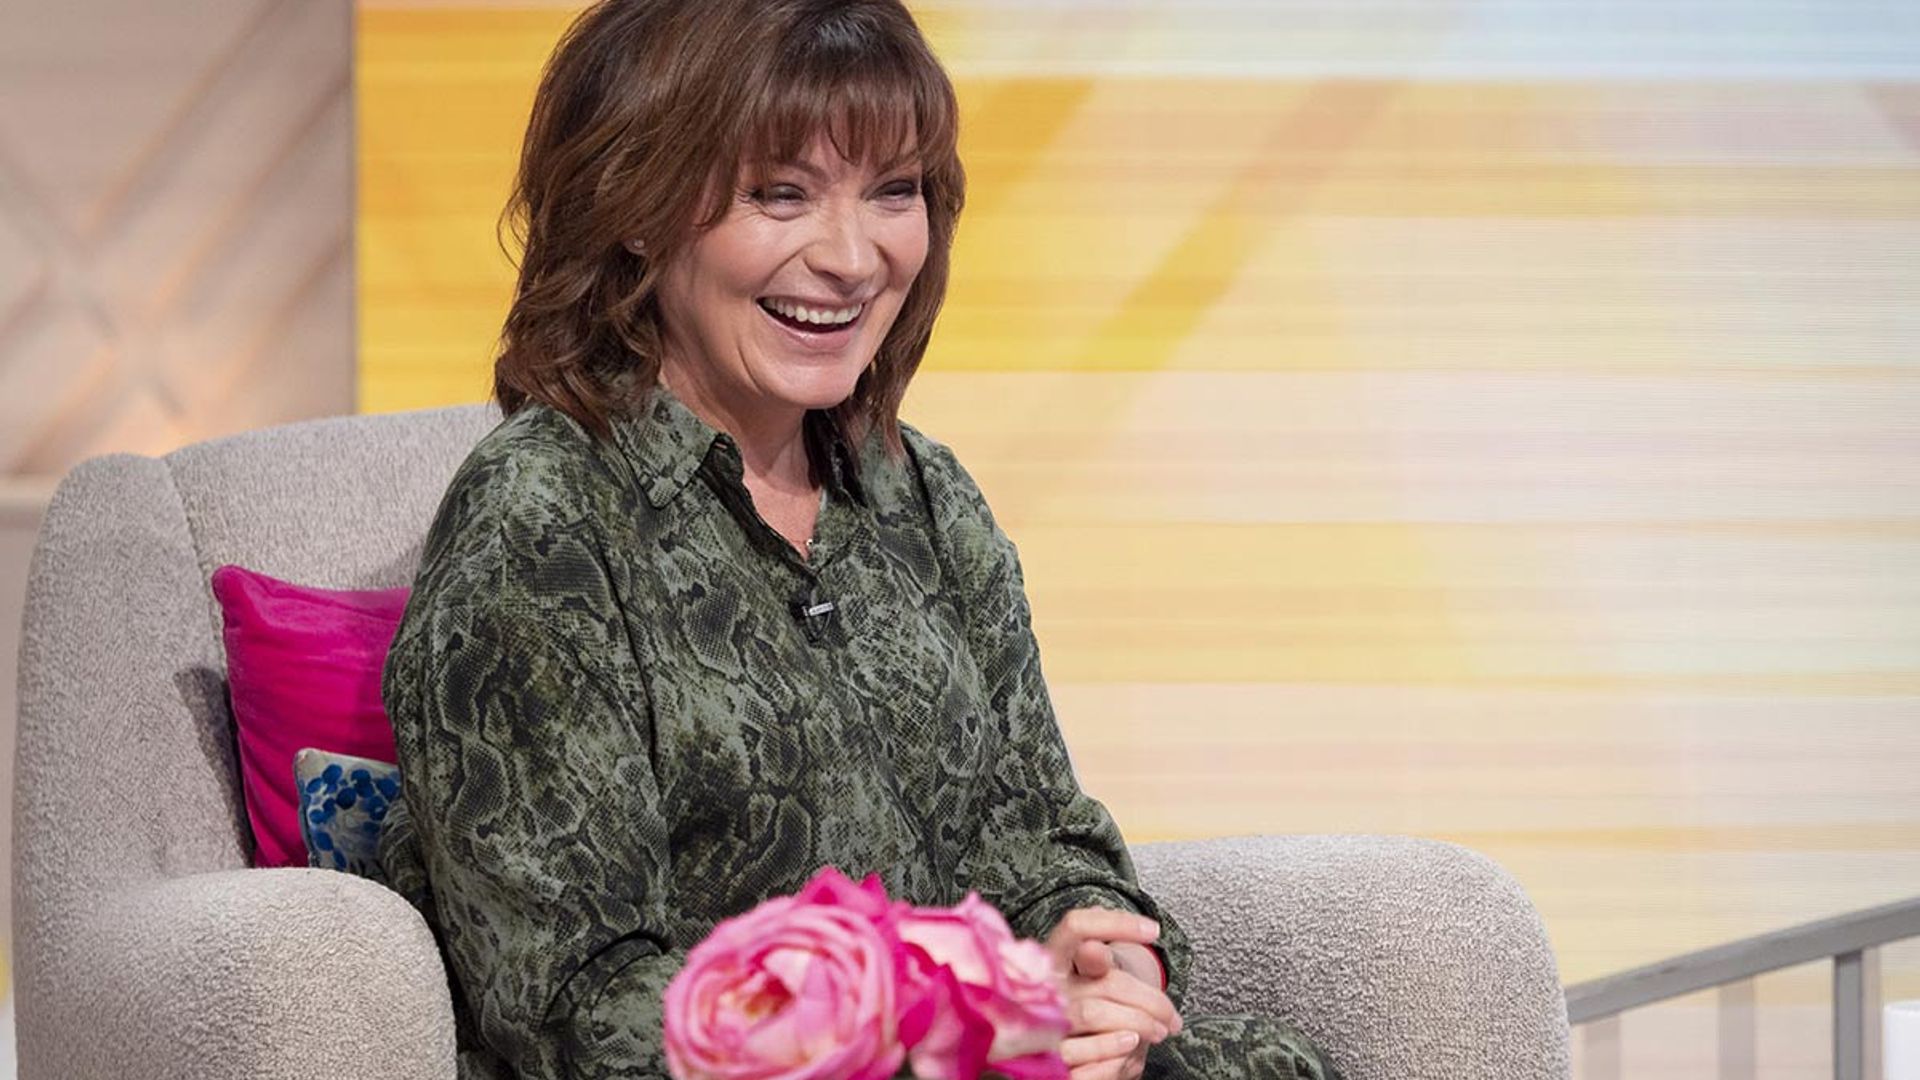 Lorraine Kelly's green snakeskin co-ord is actually from Mango - & cheaper than you think